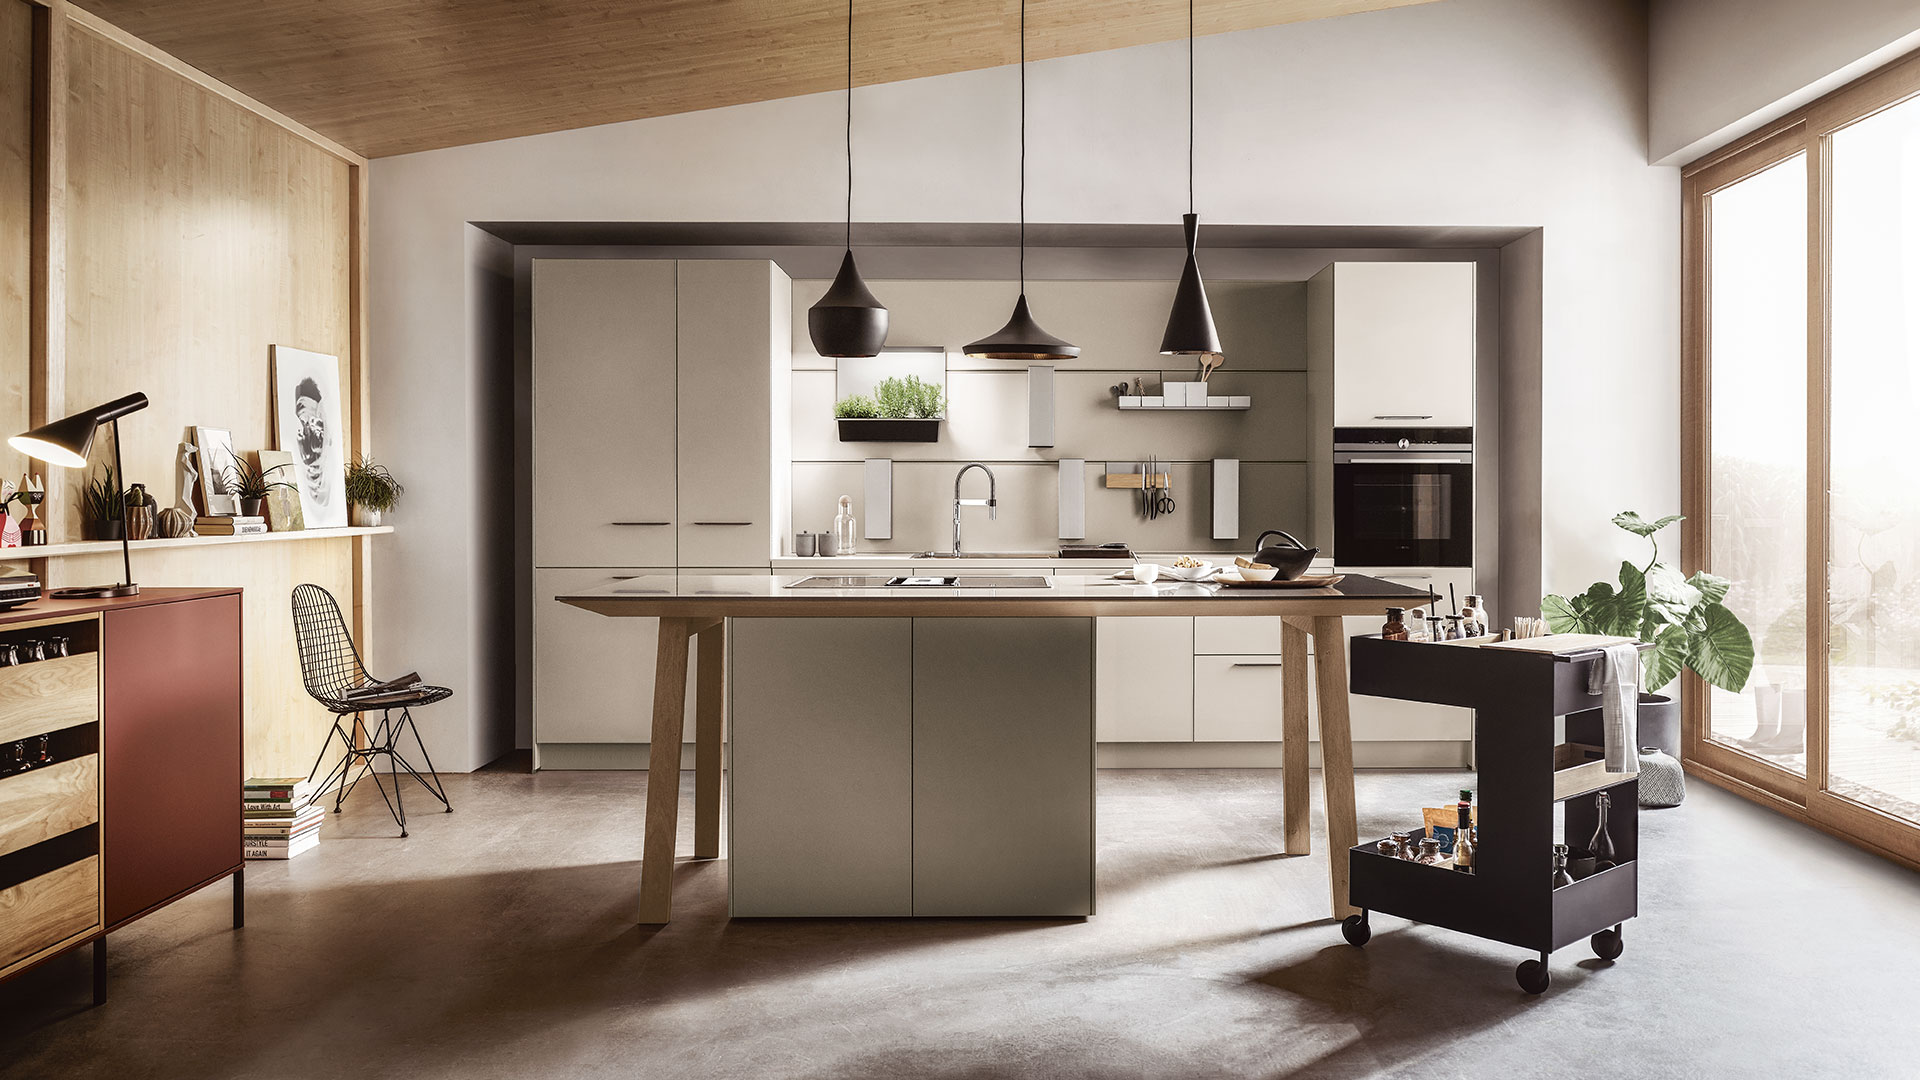 The Best Options To Improve The Aesthetics Of Your Kitchen